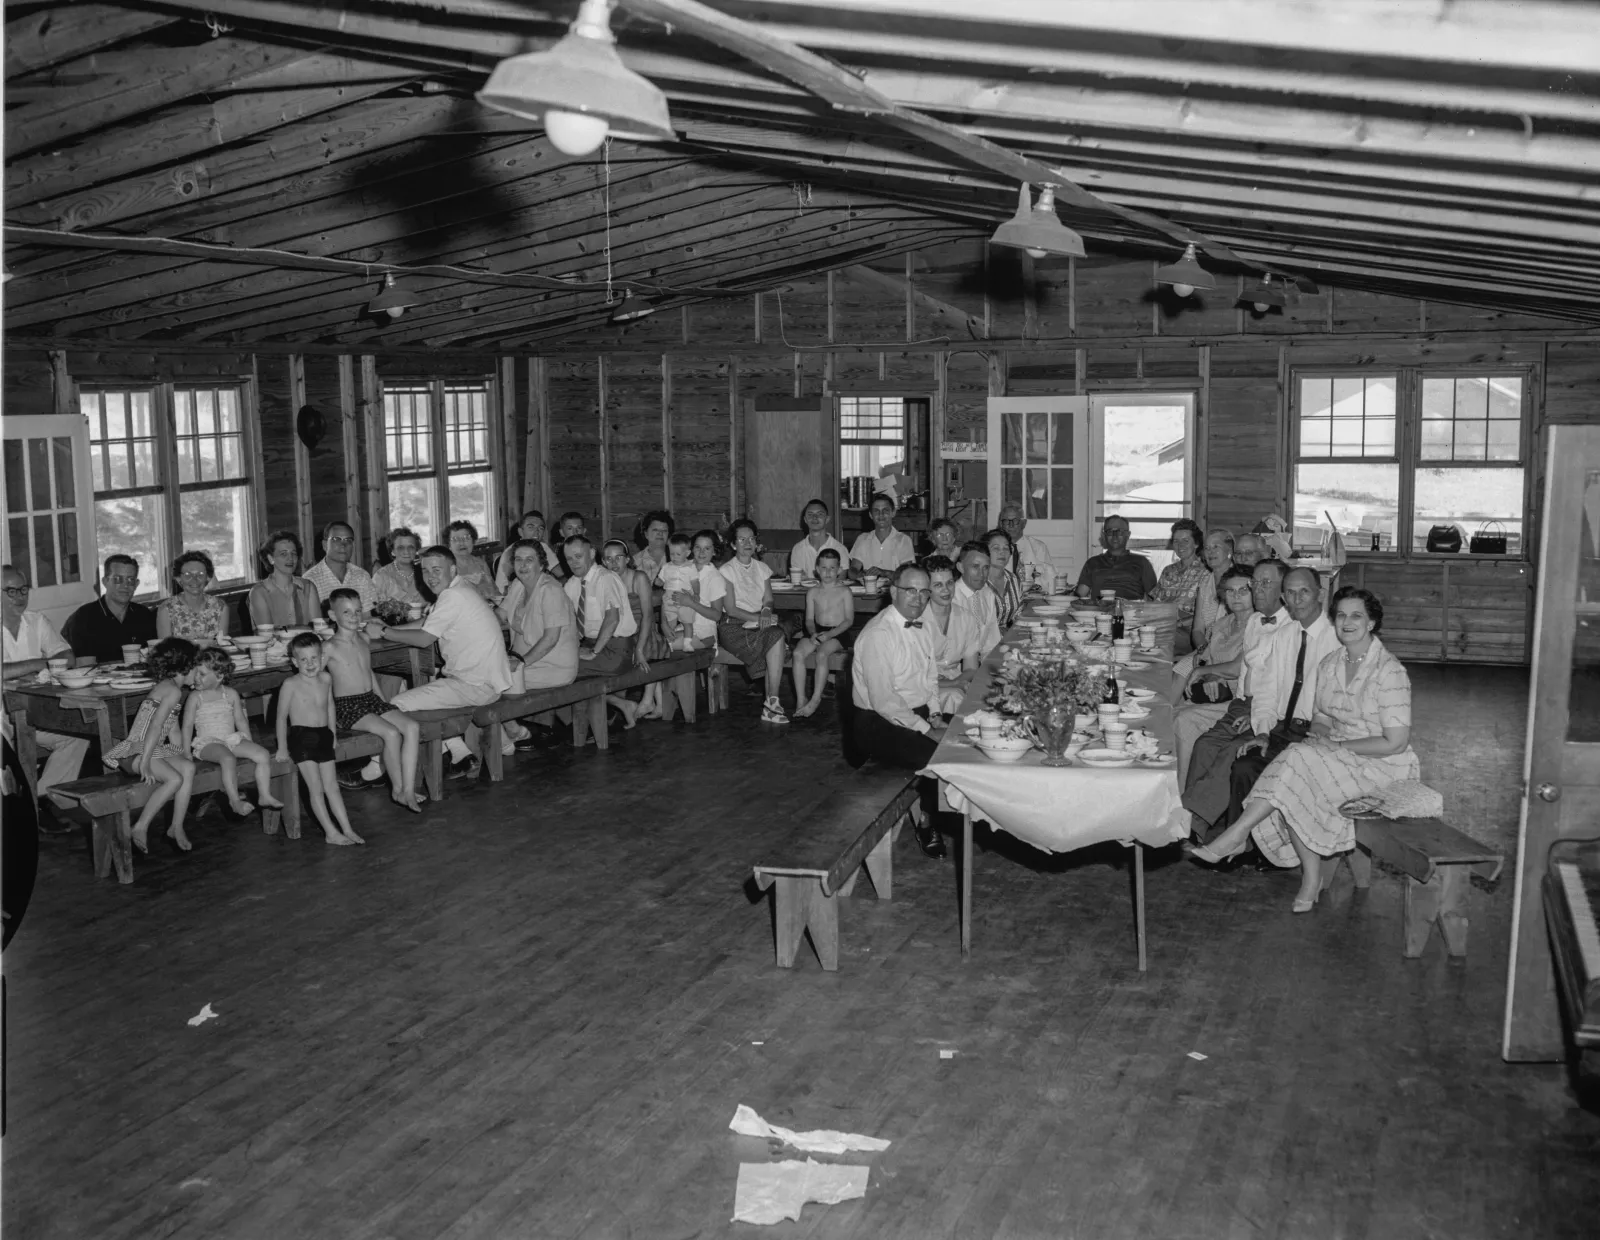 Image of the Lafferty family reunion at The State-Record Company recreation area on May 28, 1960.